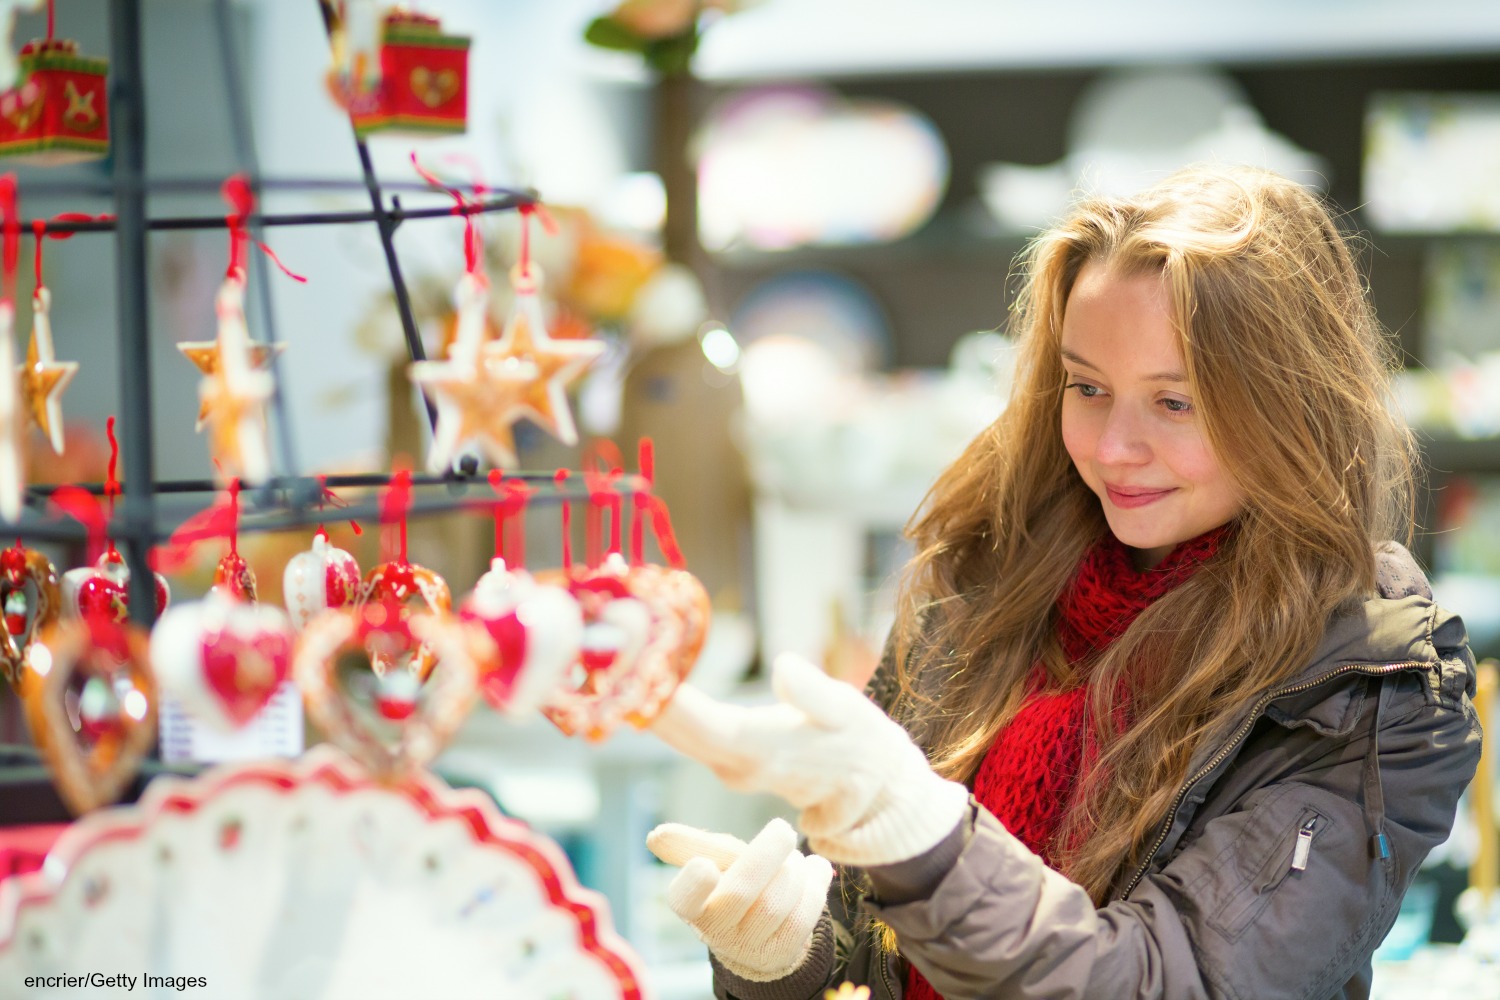 Experience This Top Holiday Market, Christkindlmarkt, in Bethlehem, PA